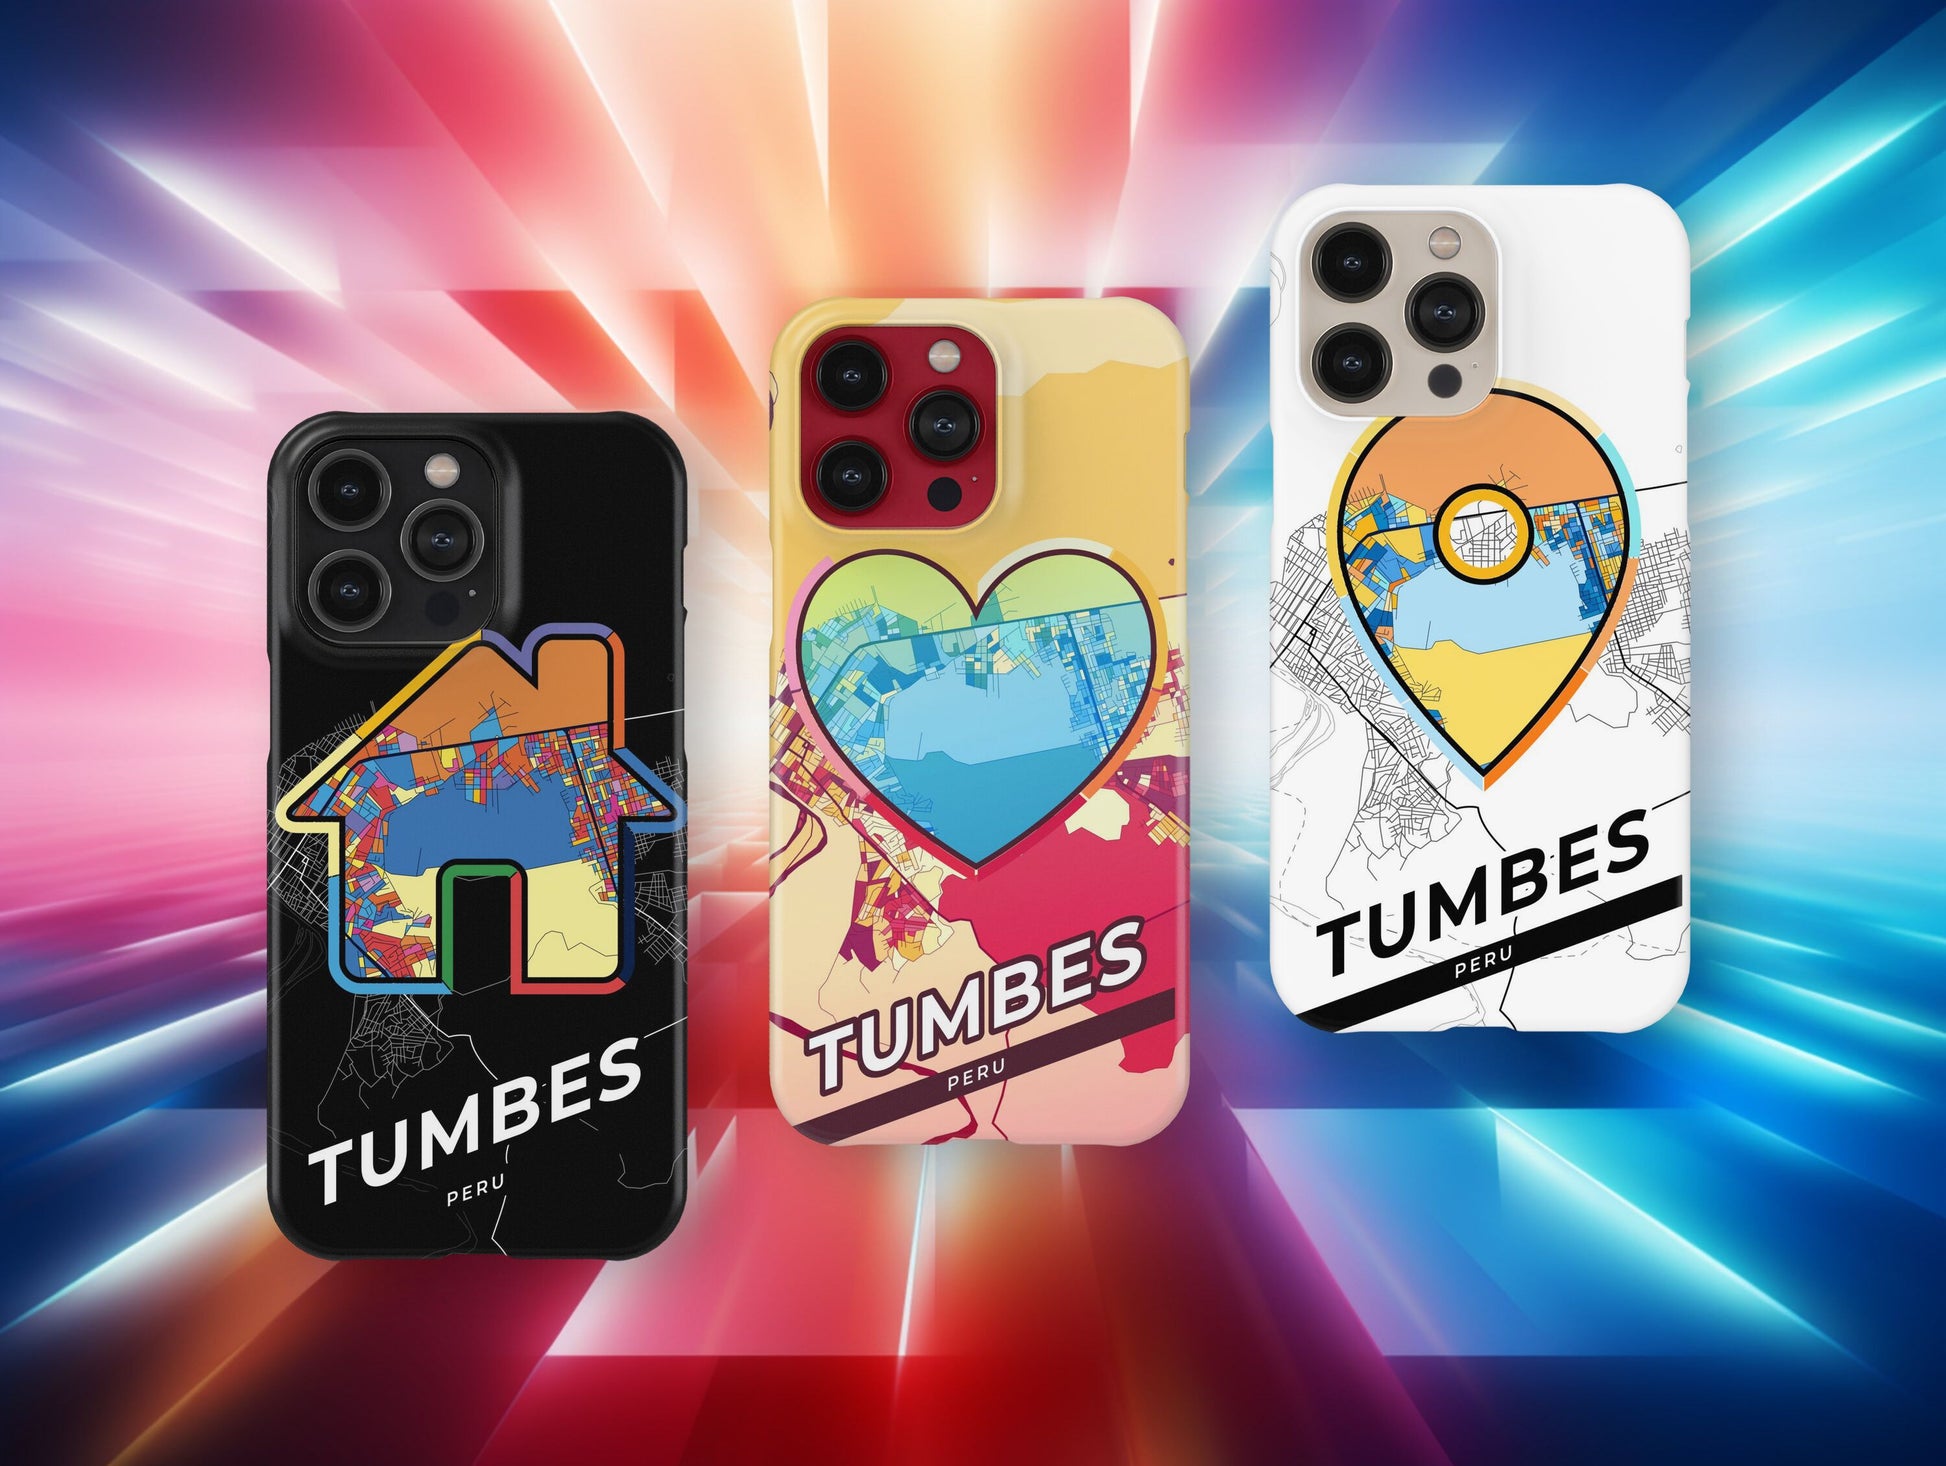 Tumbes Peru slim phone case with colorful icon. Birthday, wedding or housewarming gift. Couple match cases.